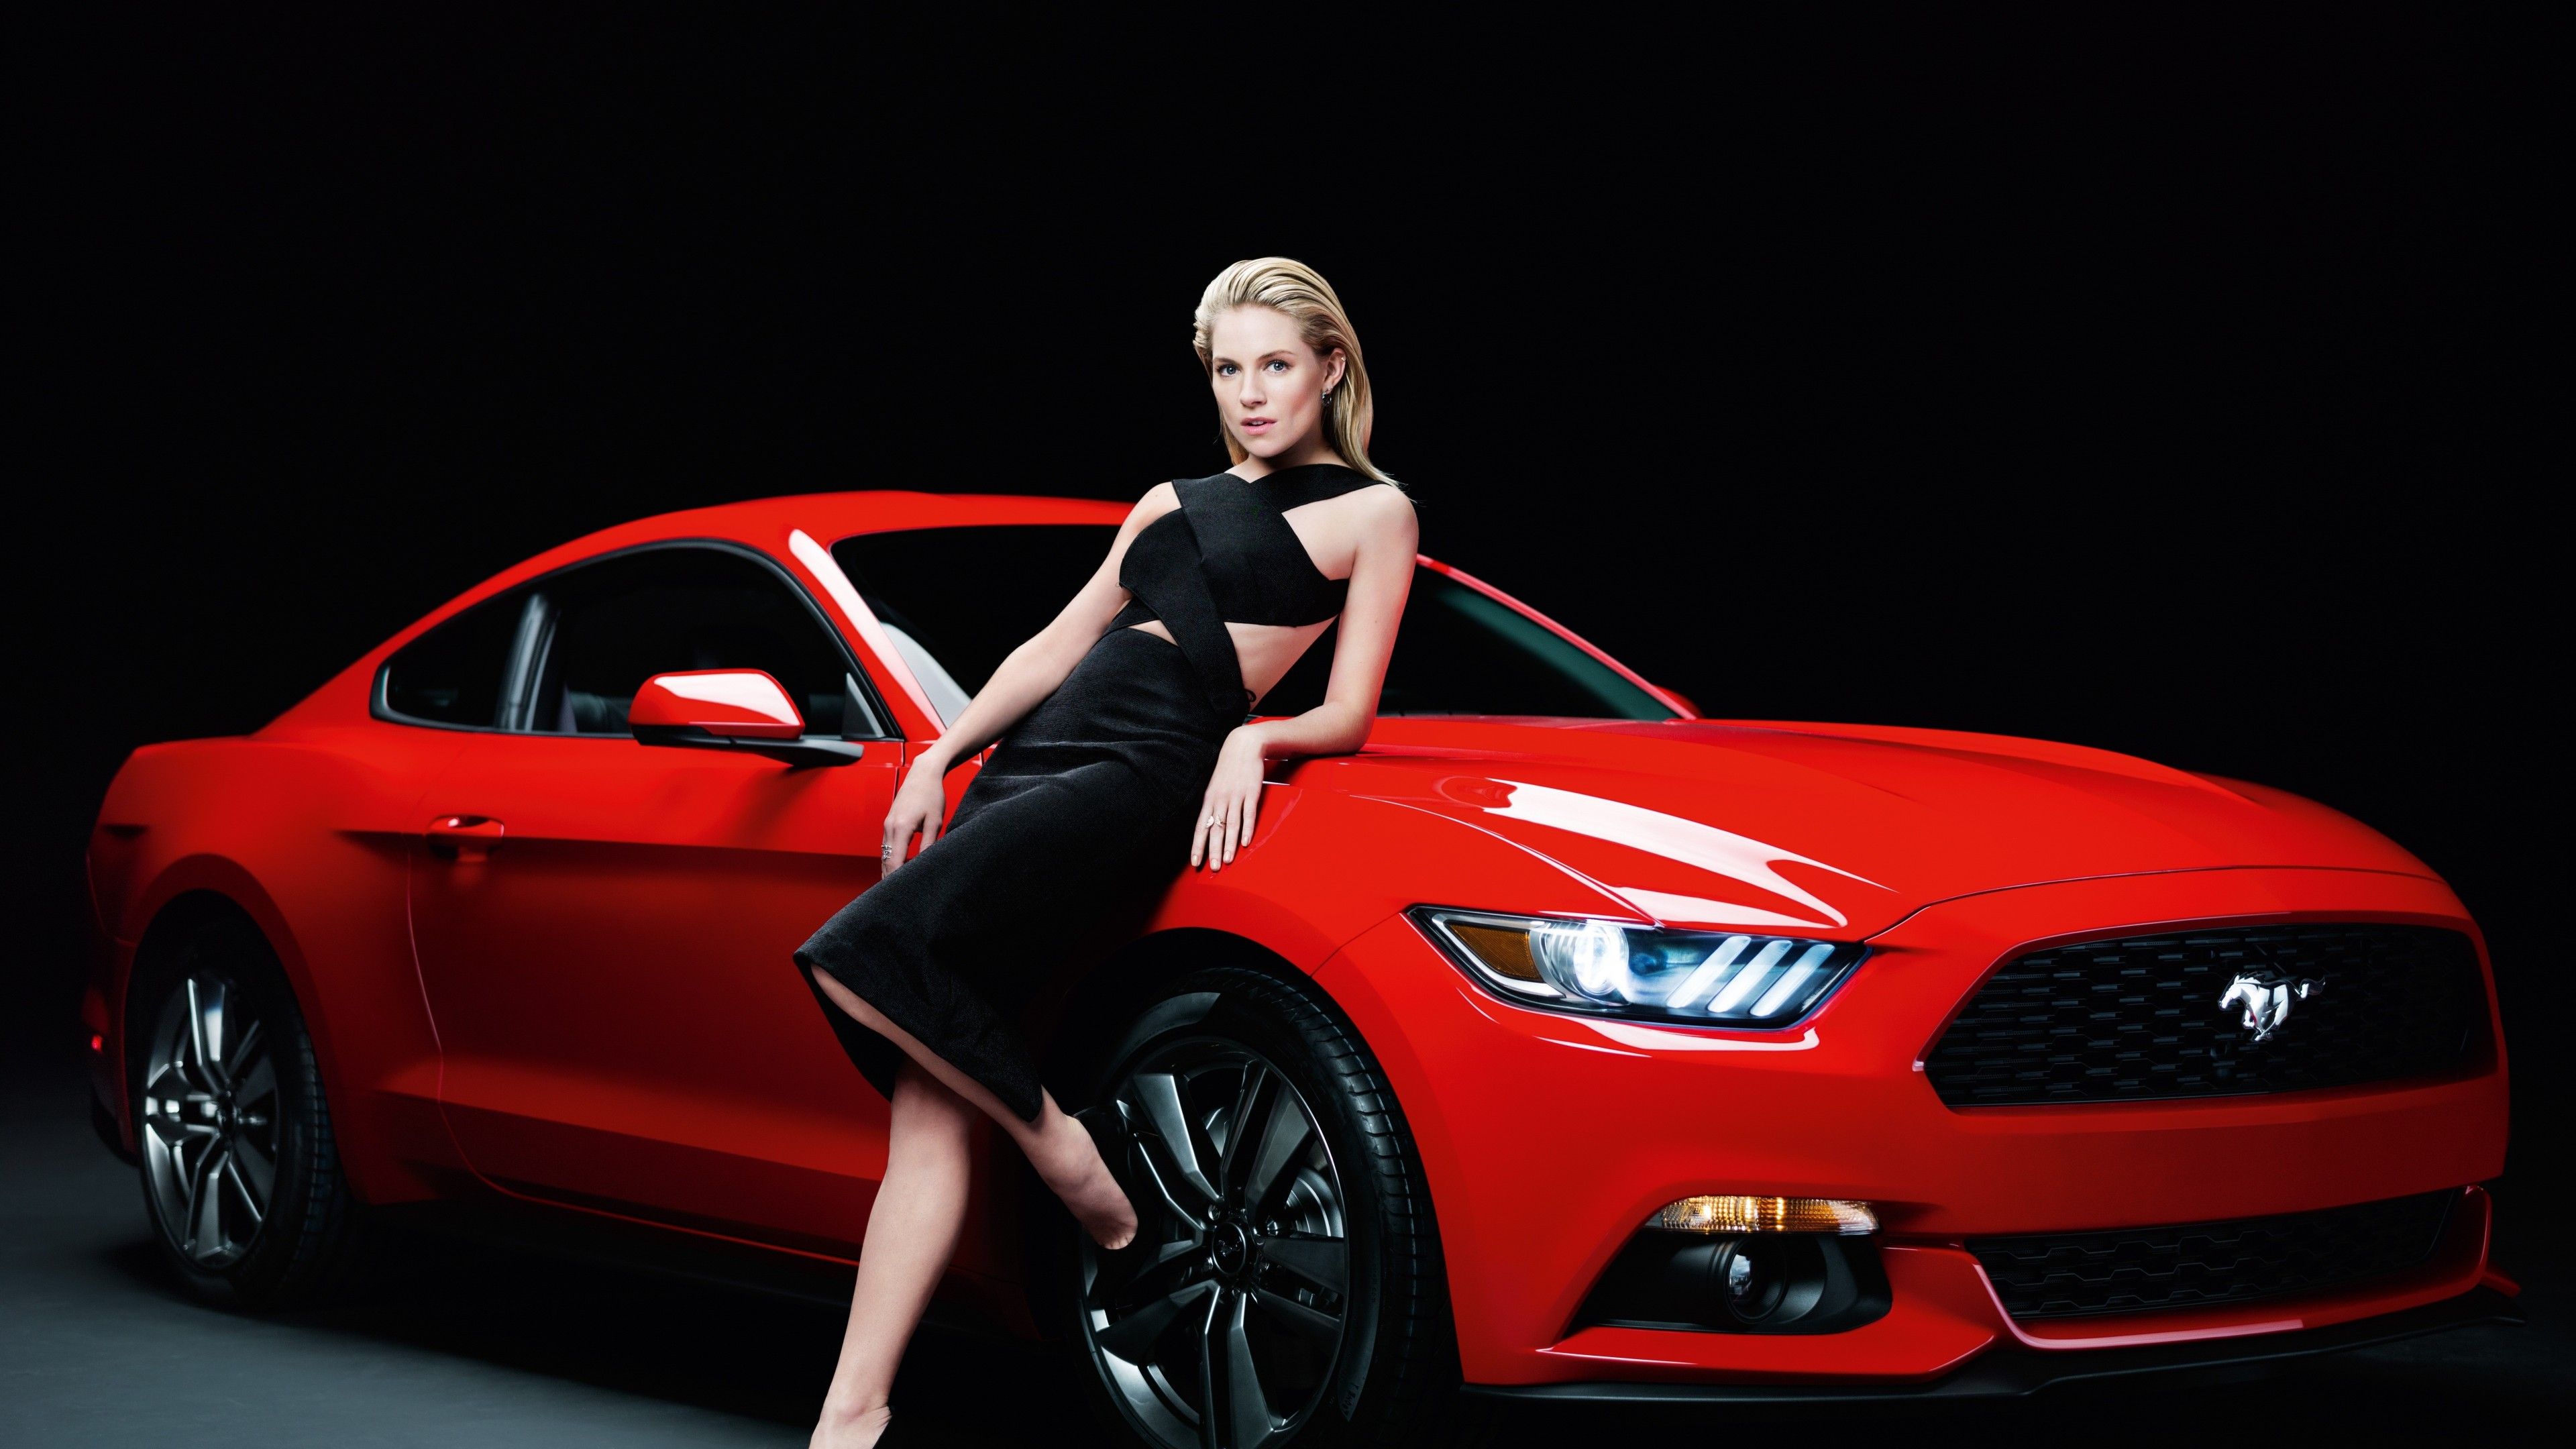 Wallpaper Ford Mustang, Sienna Miller, girl, red, coupe., Cars & Bikes